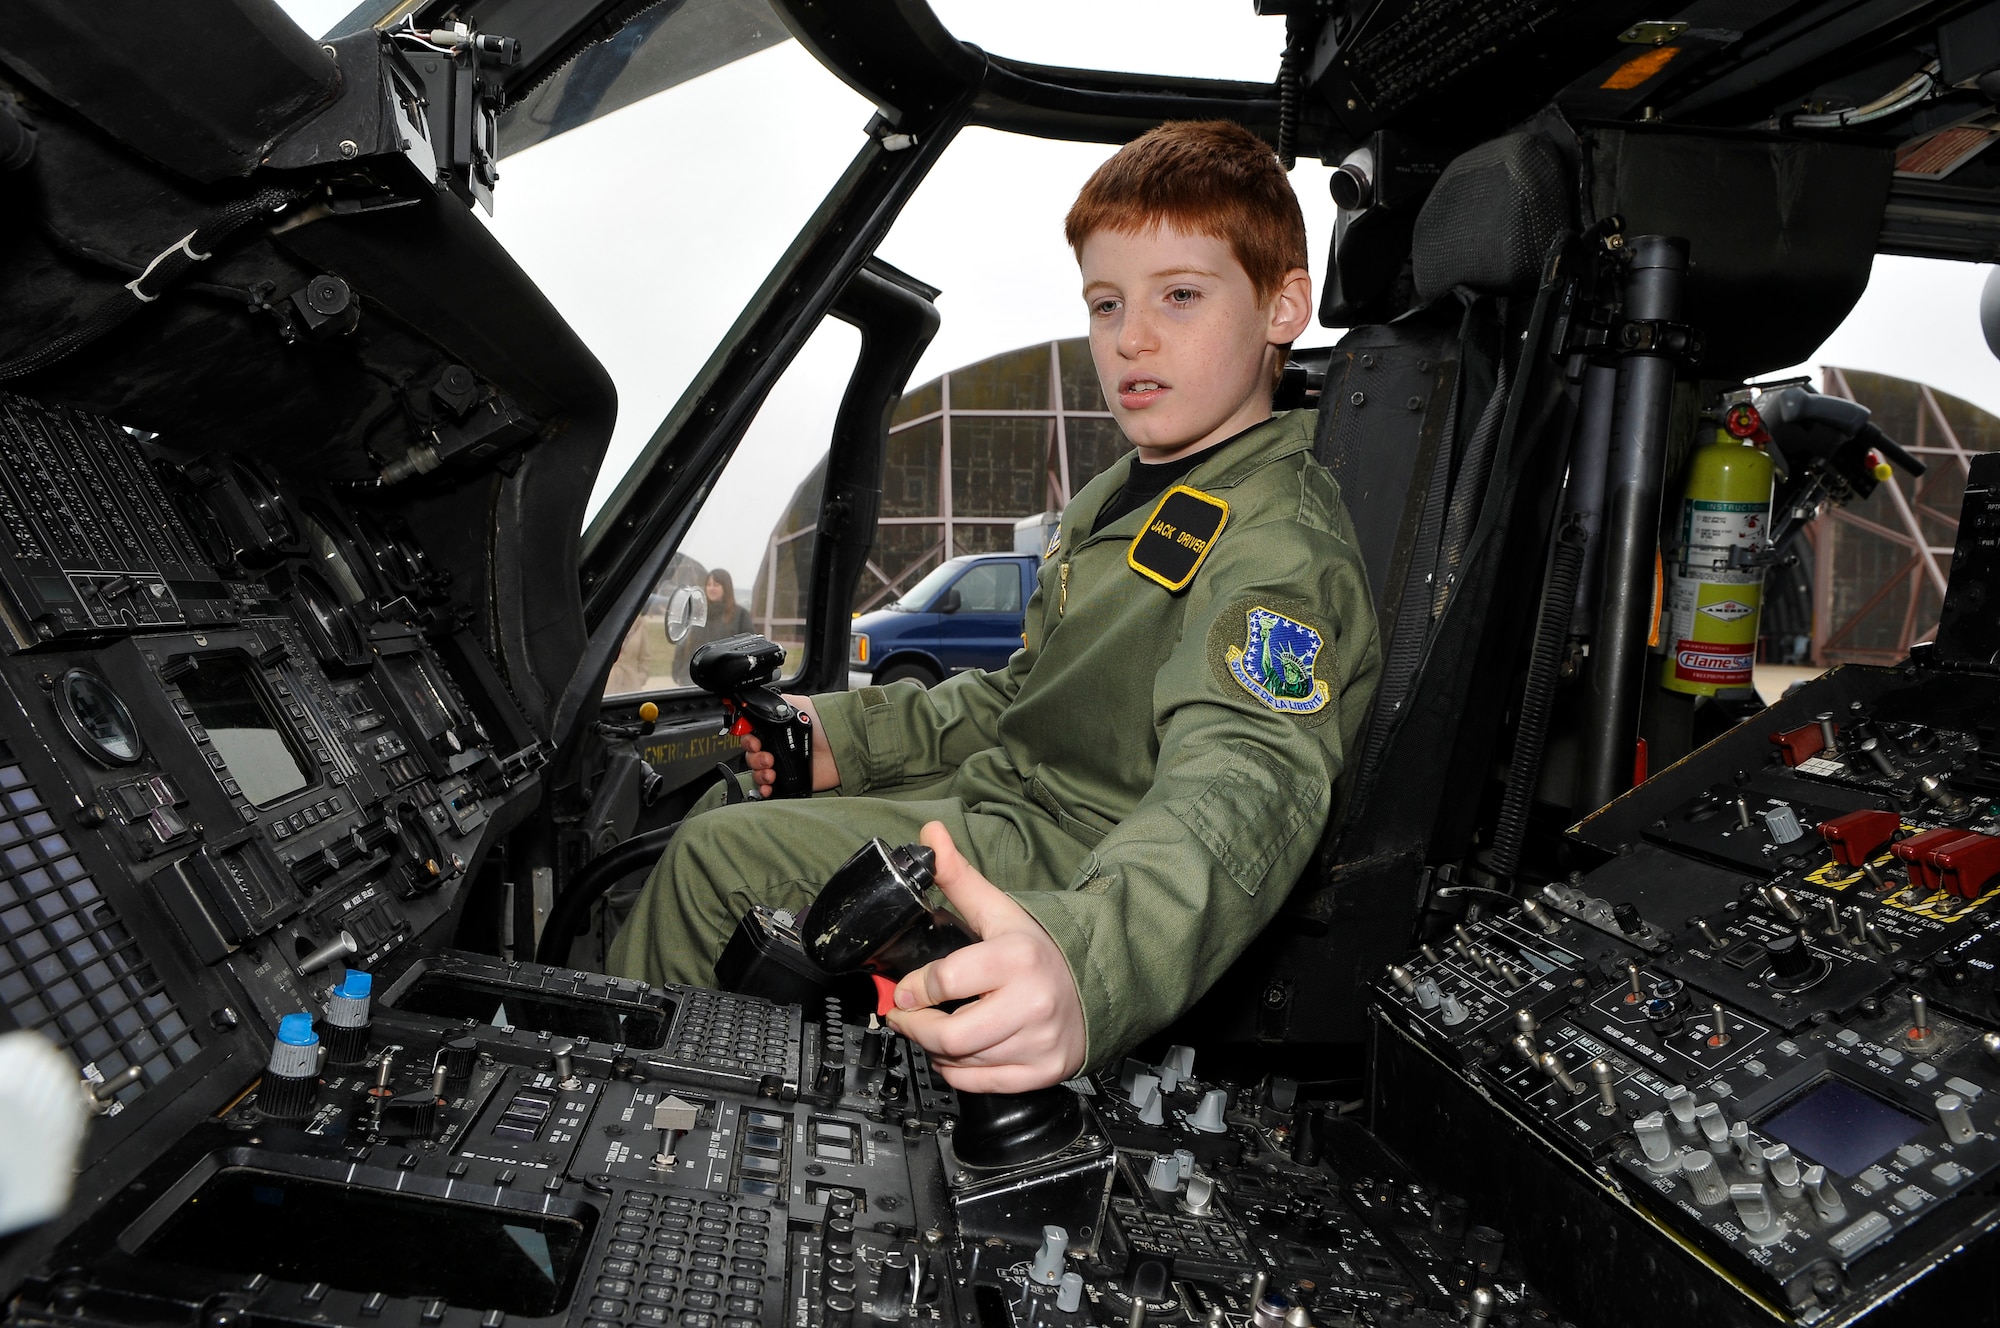 ROYAL AIR FORCE LAKENHEATH, England -- Jack Driver, 10, uses the controls inside an HH-60 Pave Hawk helicopter on the RAF Lakenheath flightline March 14, 2012.  Driver, who suffers from Aplastic Anemia, a rare auto immune disorder where bone marrow fails to make enough blood cells, was selected as a pilot for the day.  The Pilot for a Day program is new to RAF Lakenheath and provides children in the local community, who are fighting life-threatening illnesses or conditions, a day of fun as well as a break from the routine doctor and hospital visits. (U.S. Air Force photo by Staff Sgt. Connor Estes)